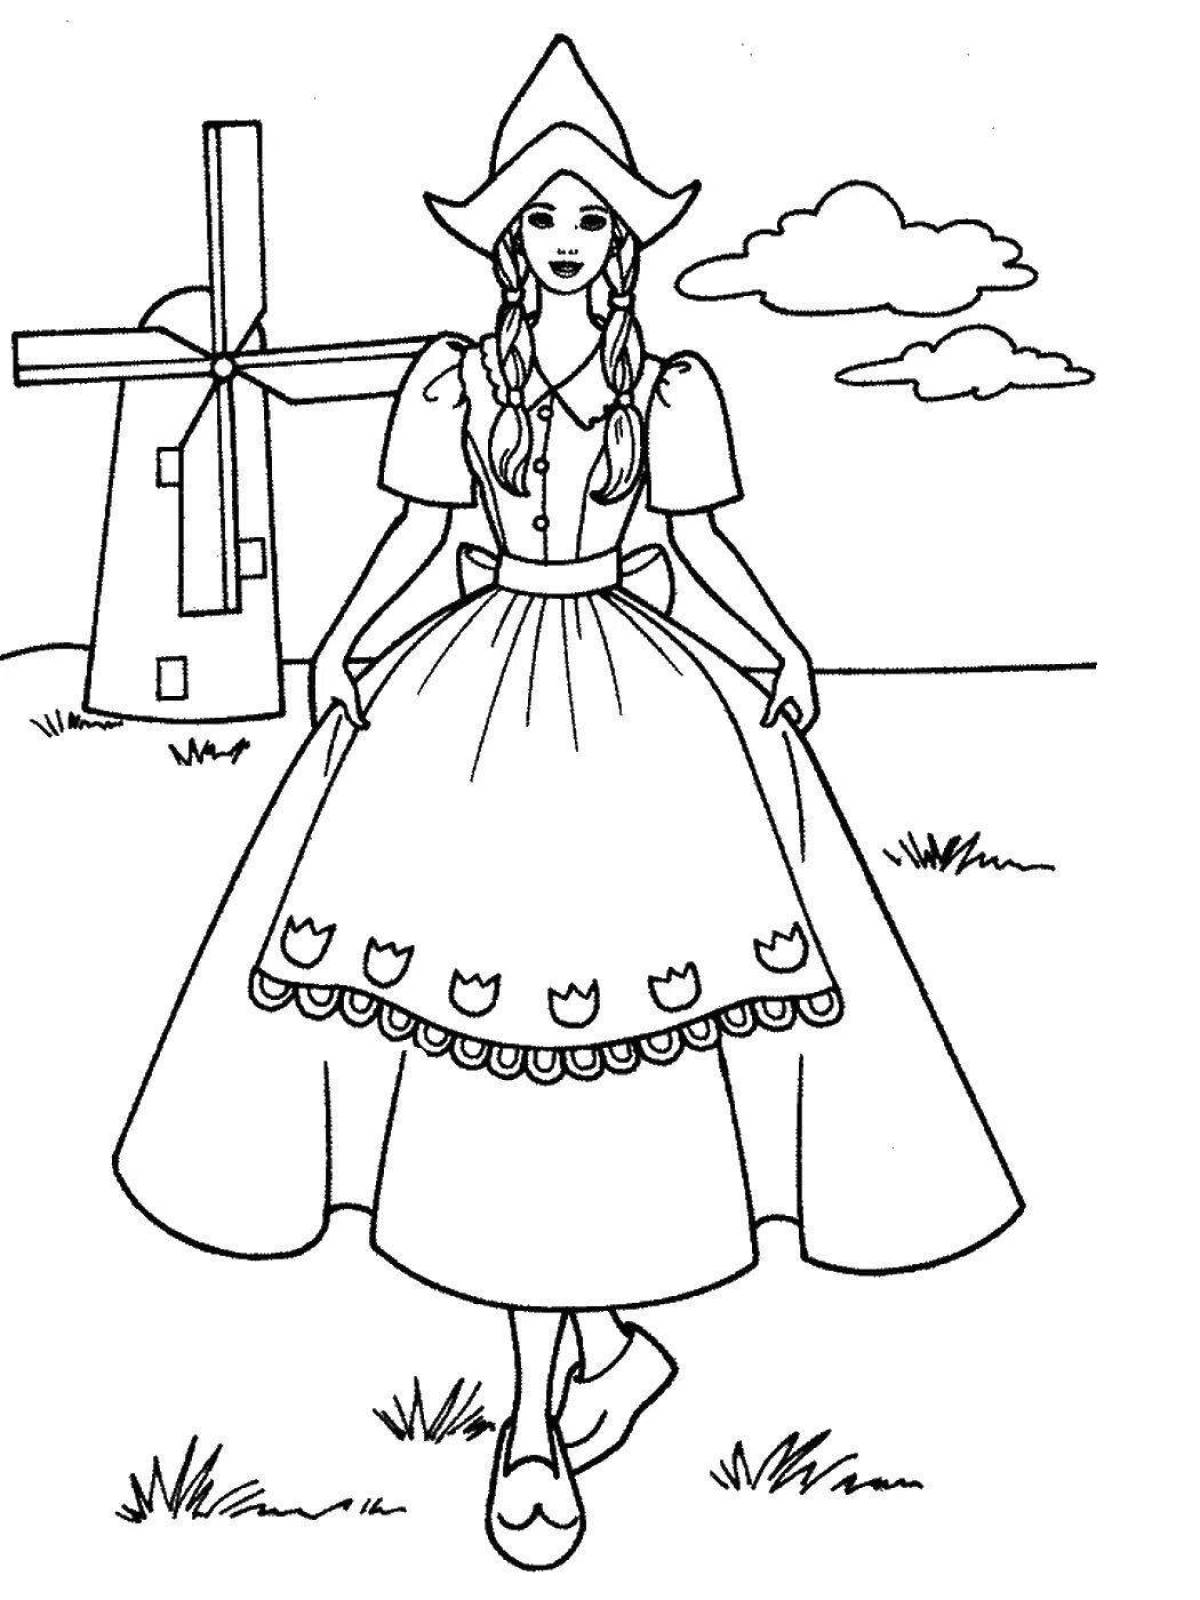 Flaming Holland coloring page